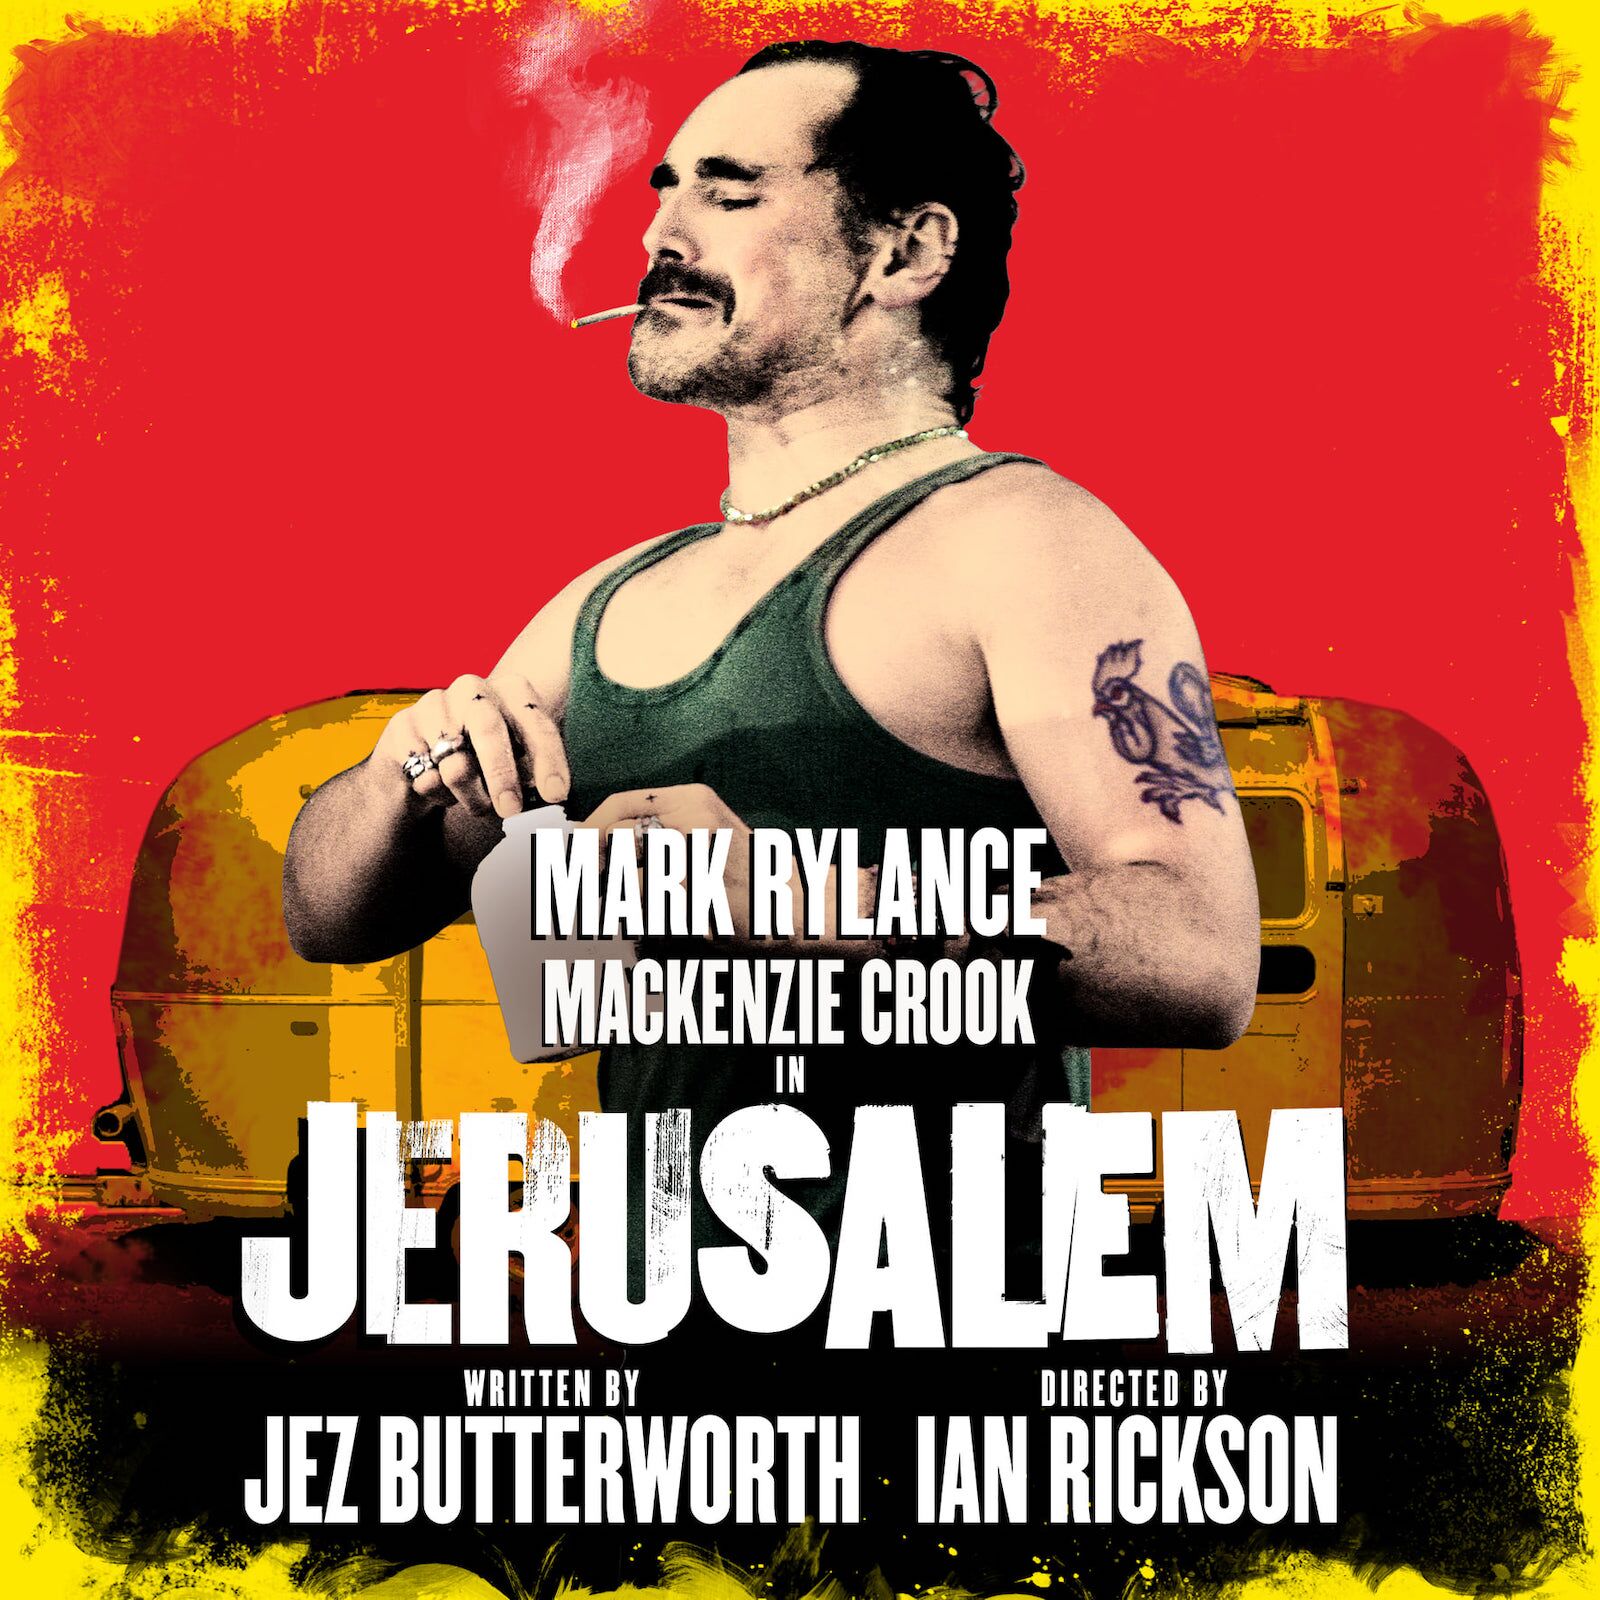 Poster for "Jerusalem", one of the best London shows in 2022